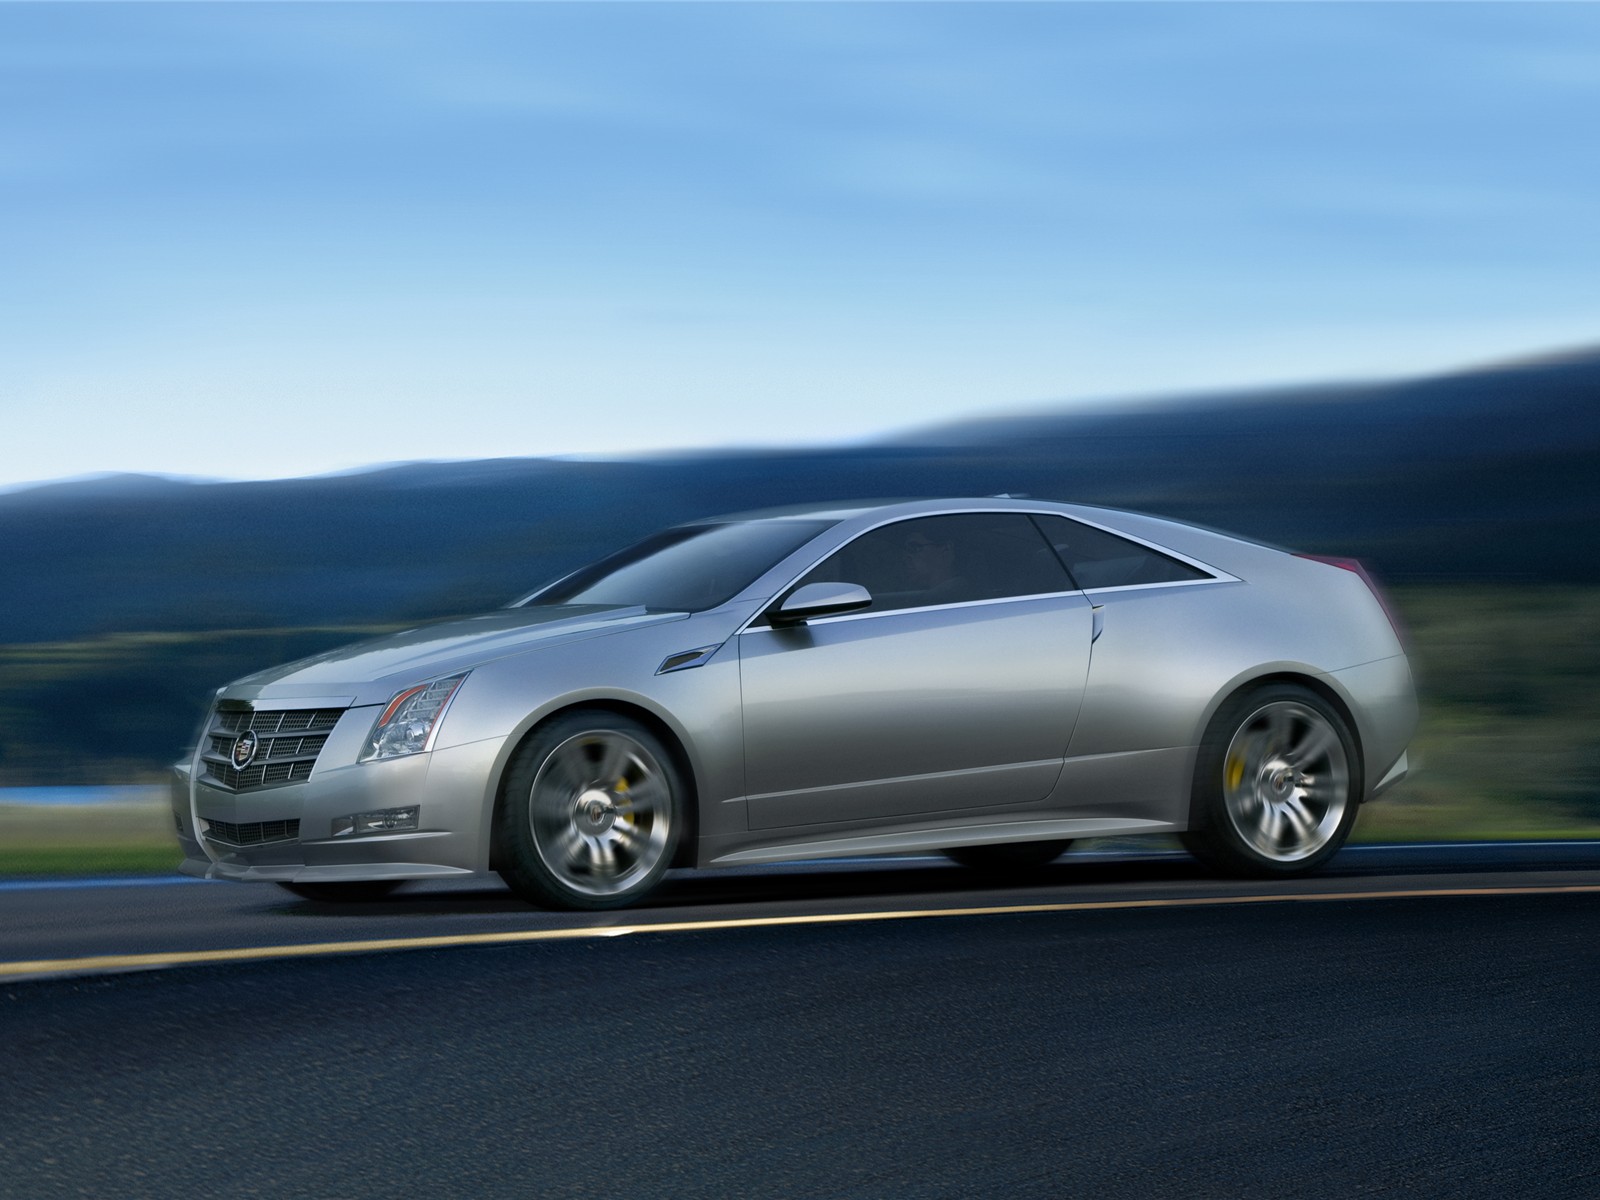 19 Ferrari 204 cadillac cts coupe wallpaper there are plenty of  from 2004-2021 